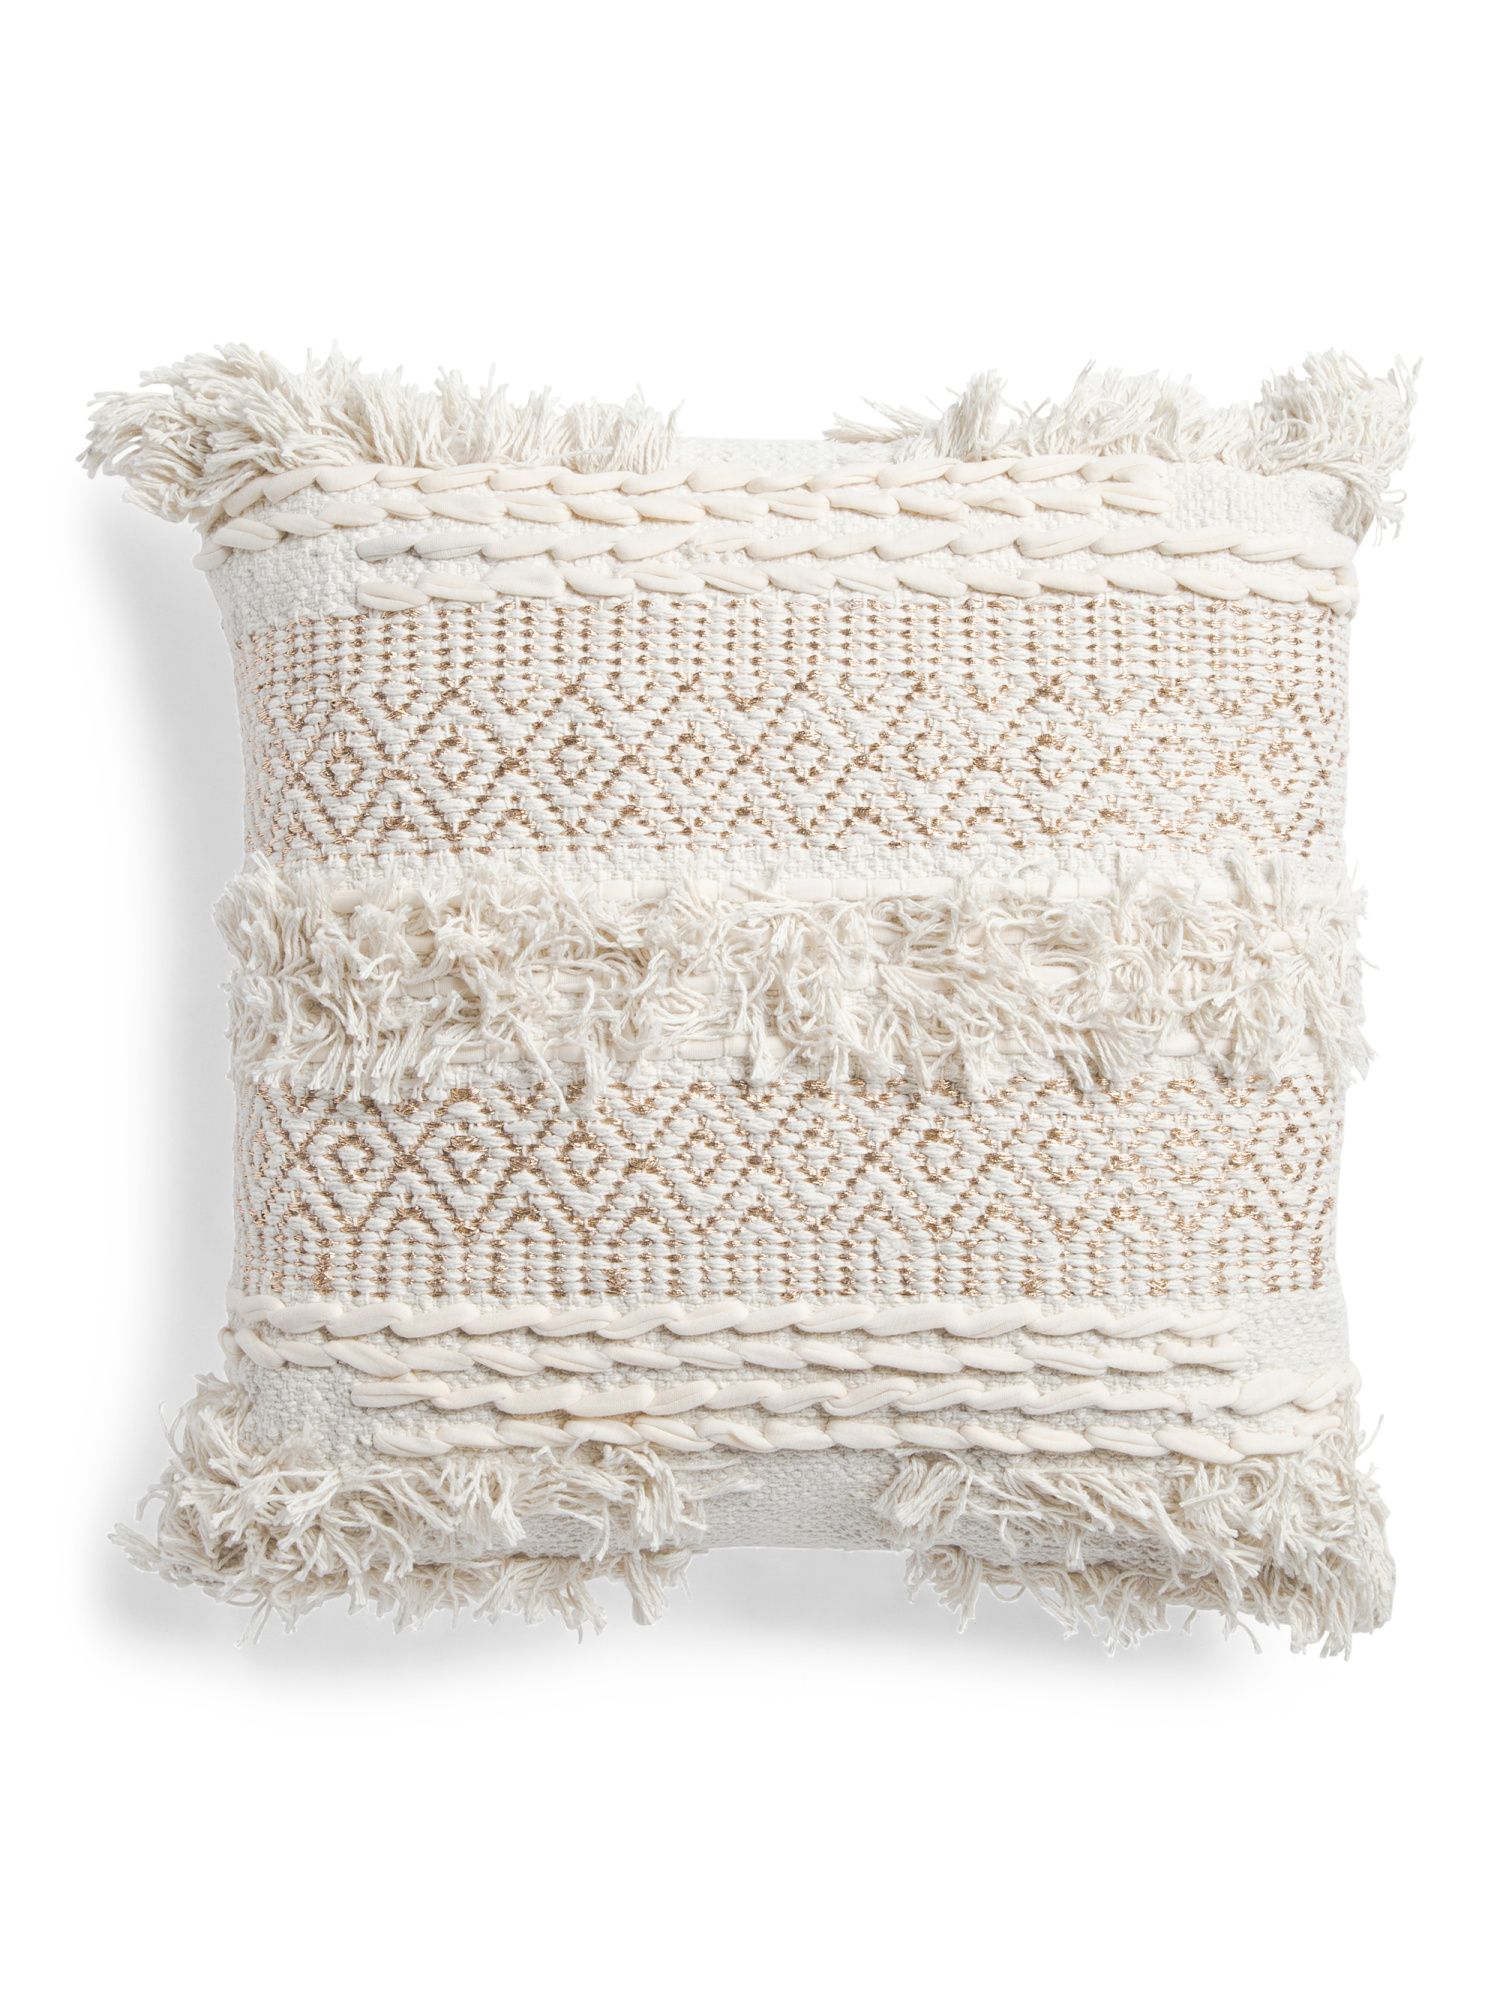 Made In India 20x20 Jersey Loop Pillow | TJ Maxx